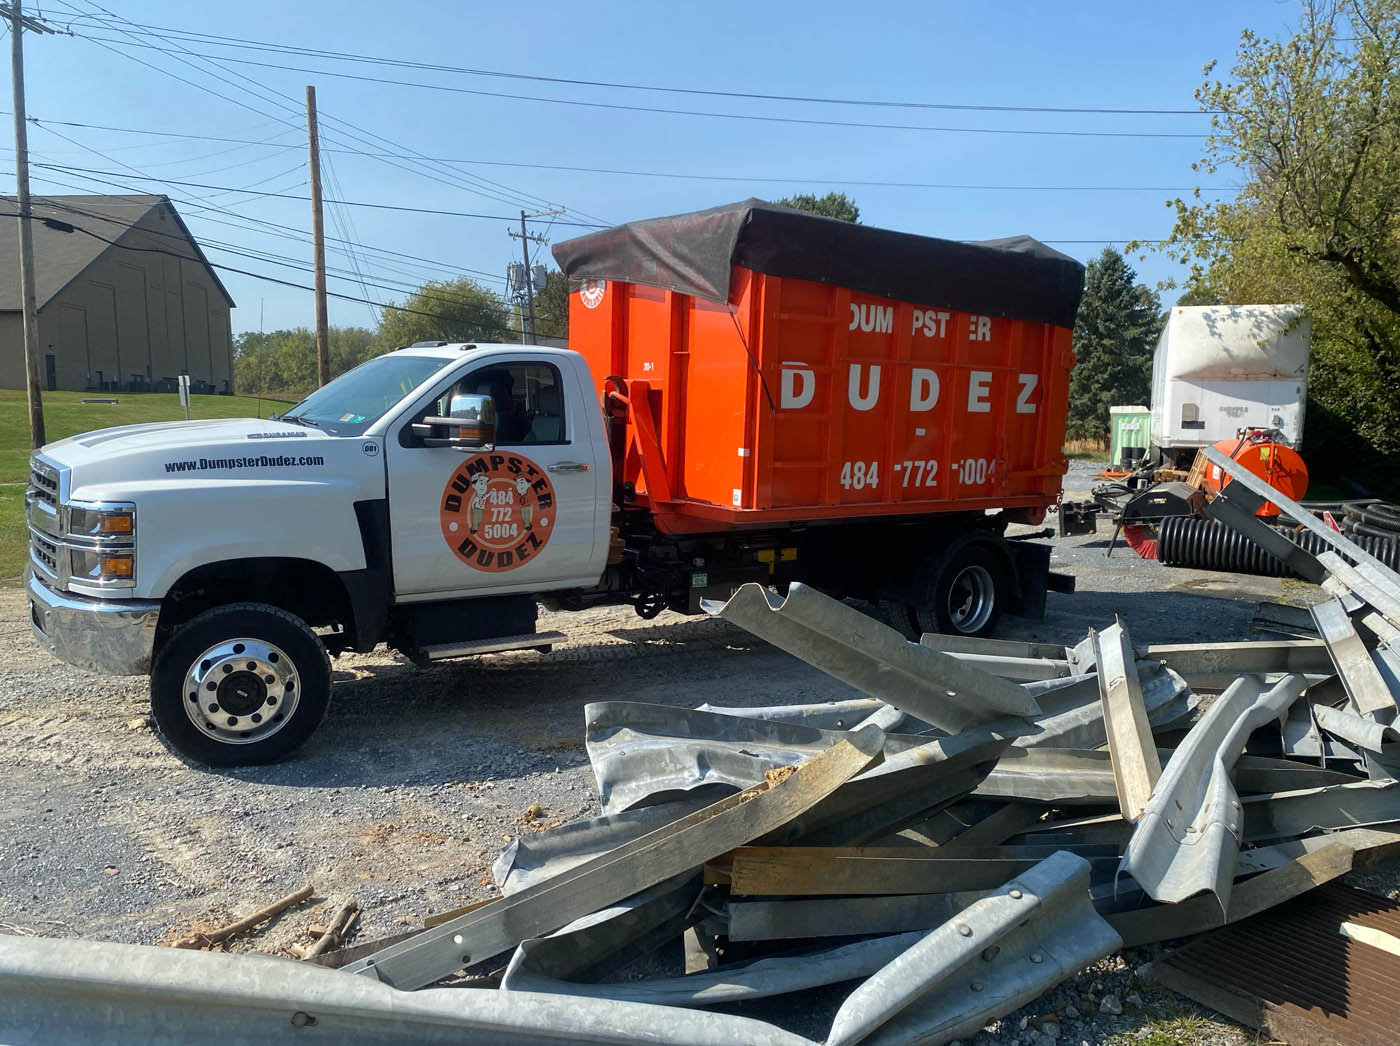 In search of junk haulers in Reading / Berks County, PA? Rent an orange dumpster from Dumpster Dudez!